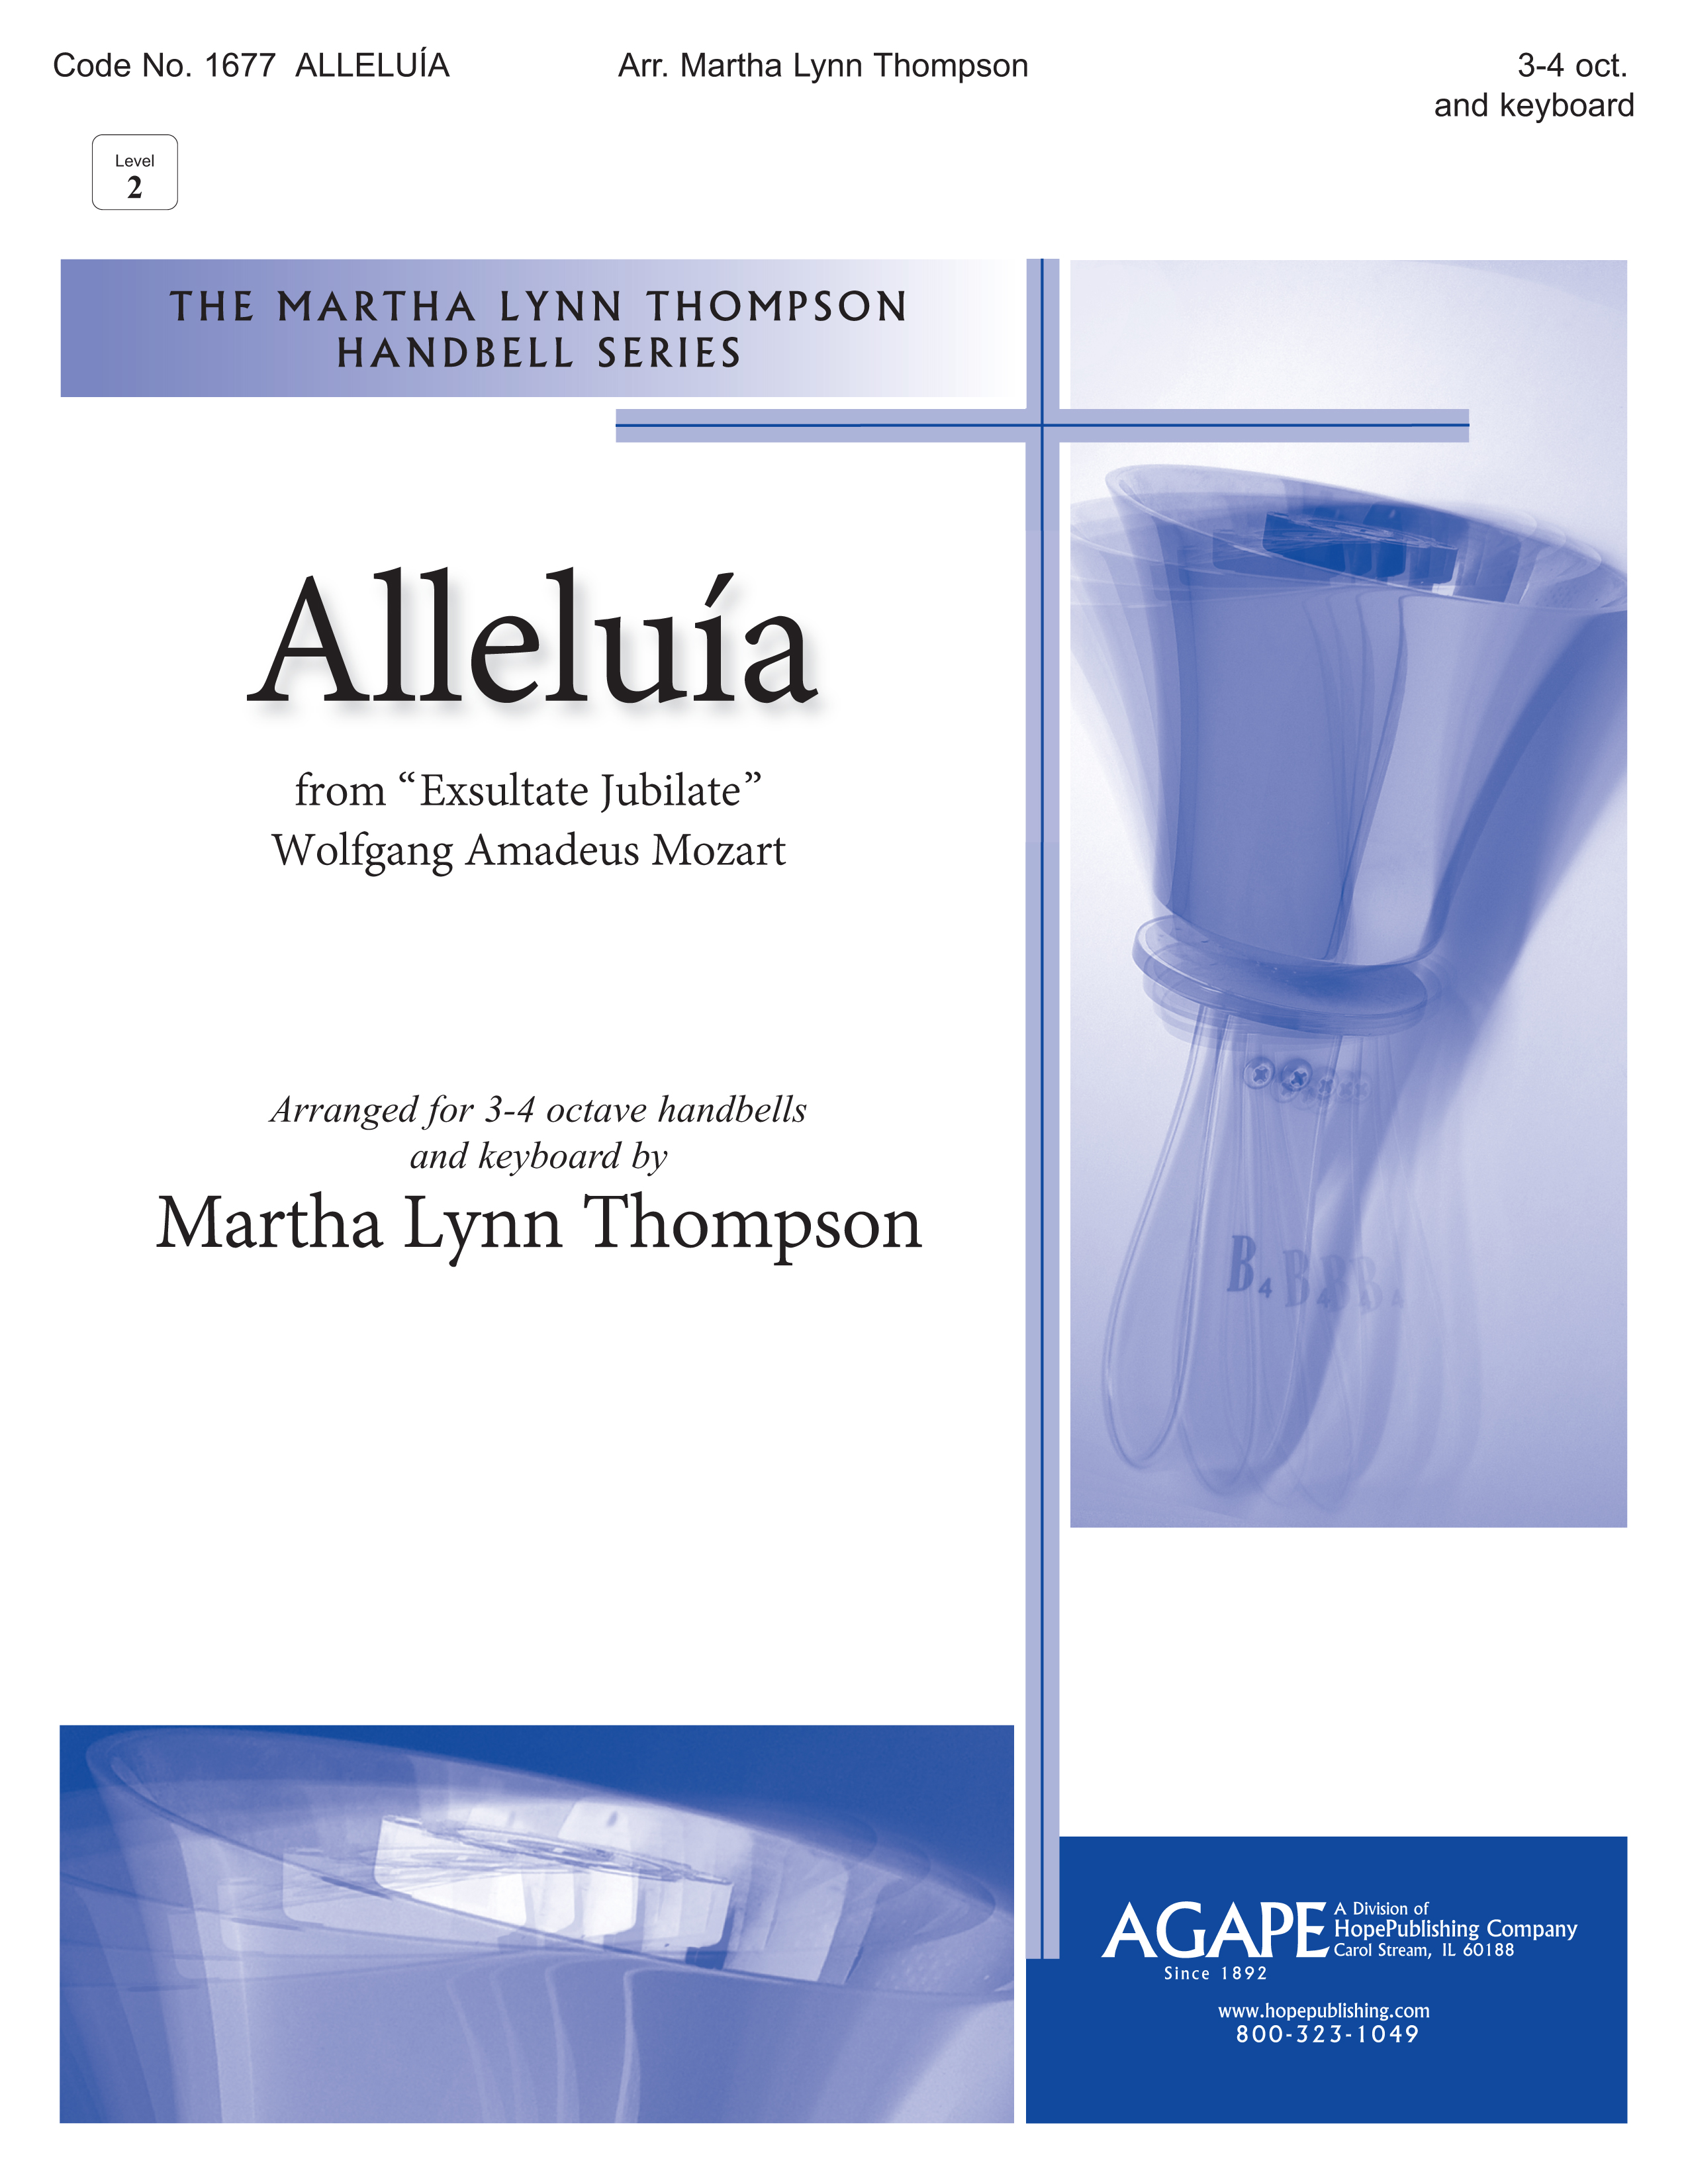 Alleluia from "Exsulate Jubilate" - Ringer Edition Cover Image